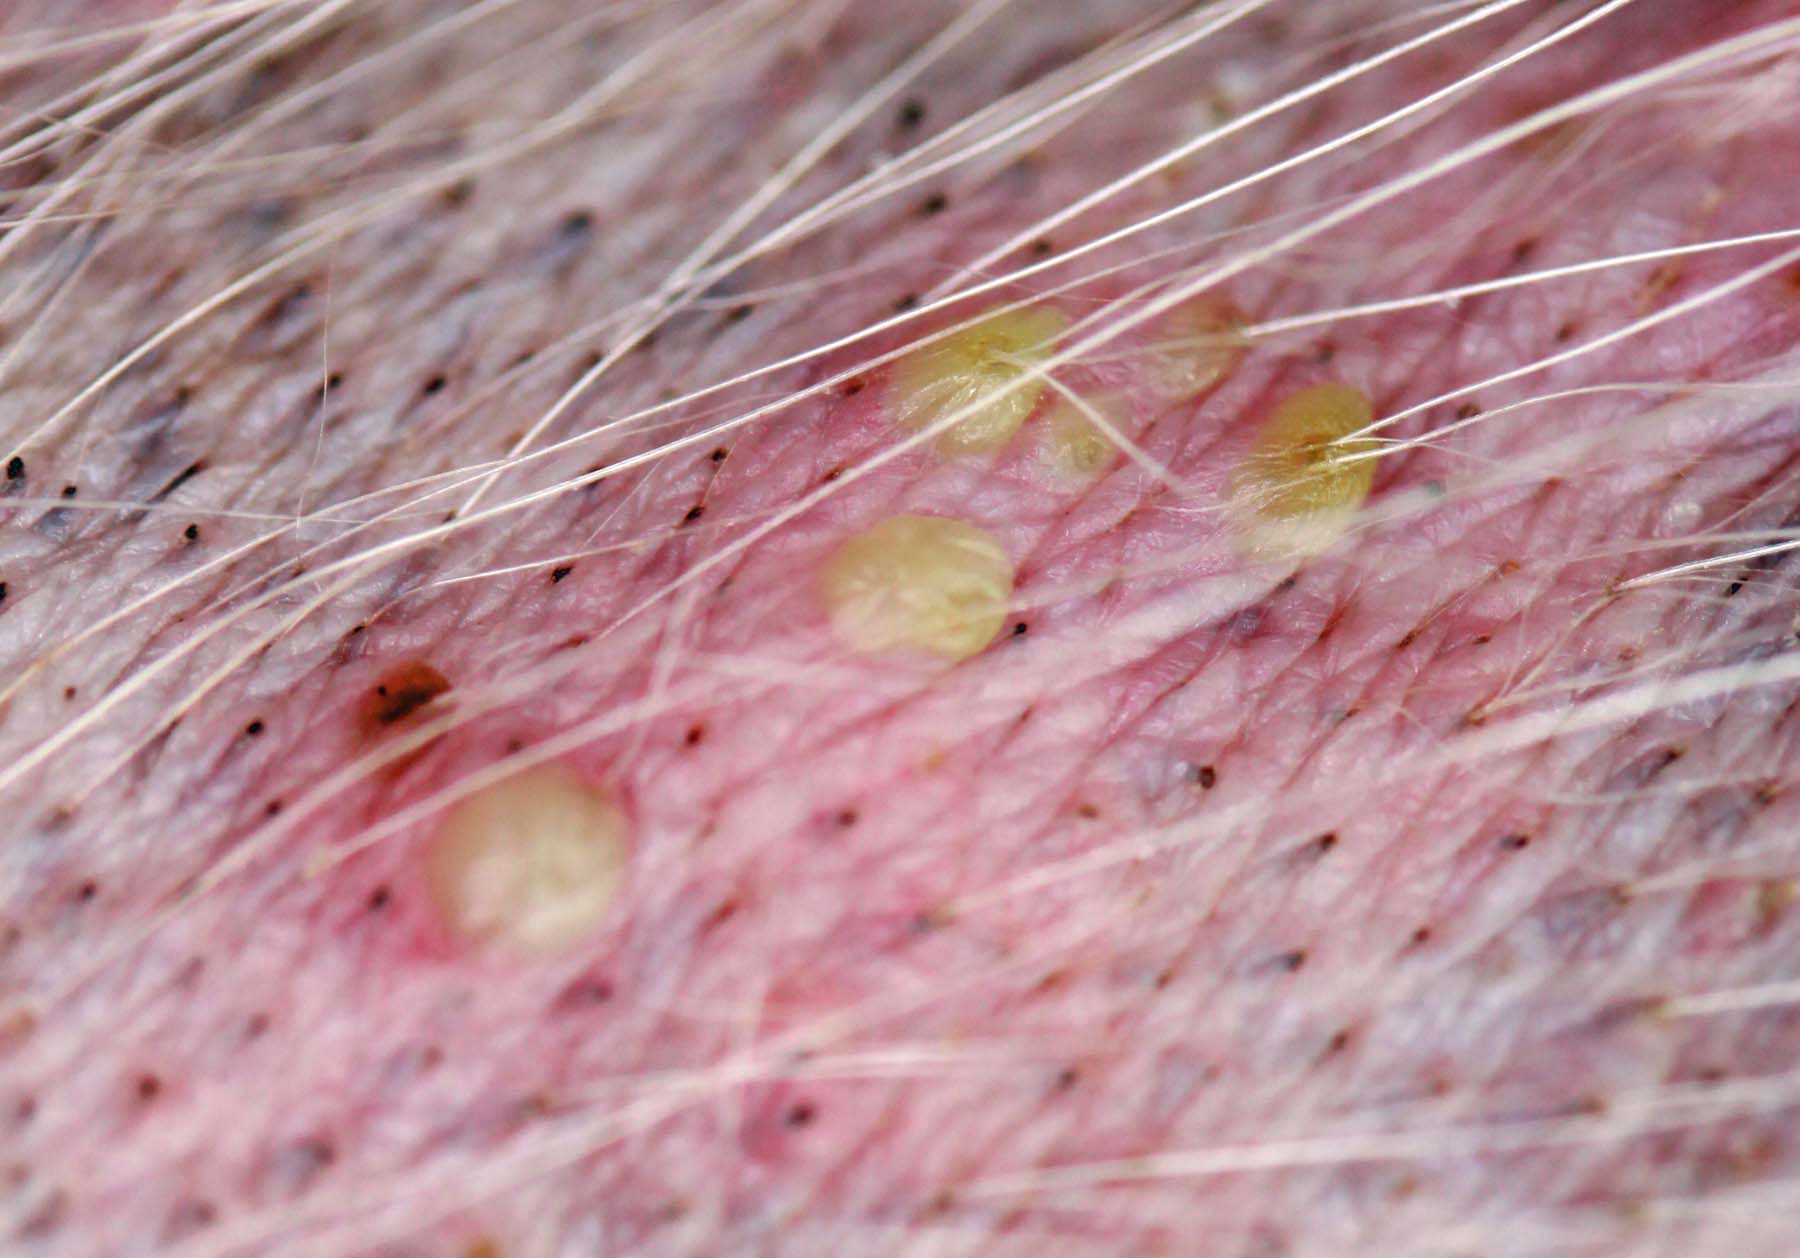 Adult-Onset Generalised Pyodemodicosis: Comedones & Prominent Follicular Pustules